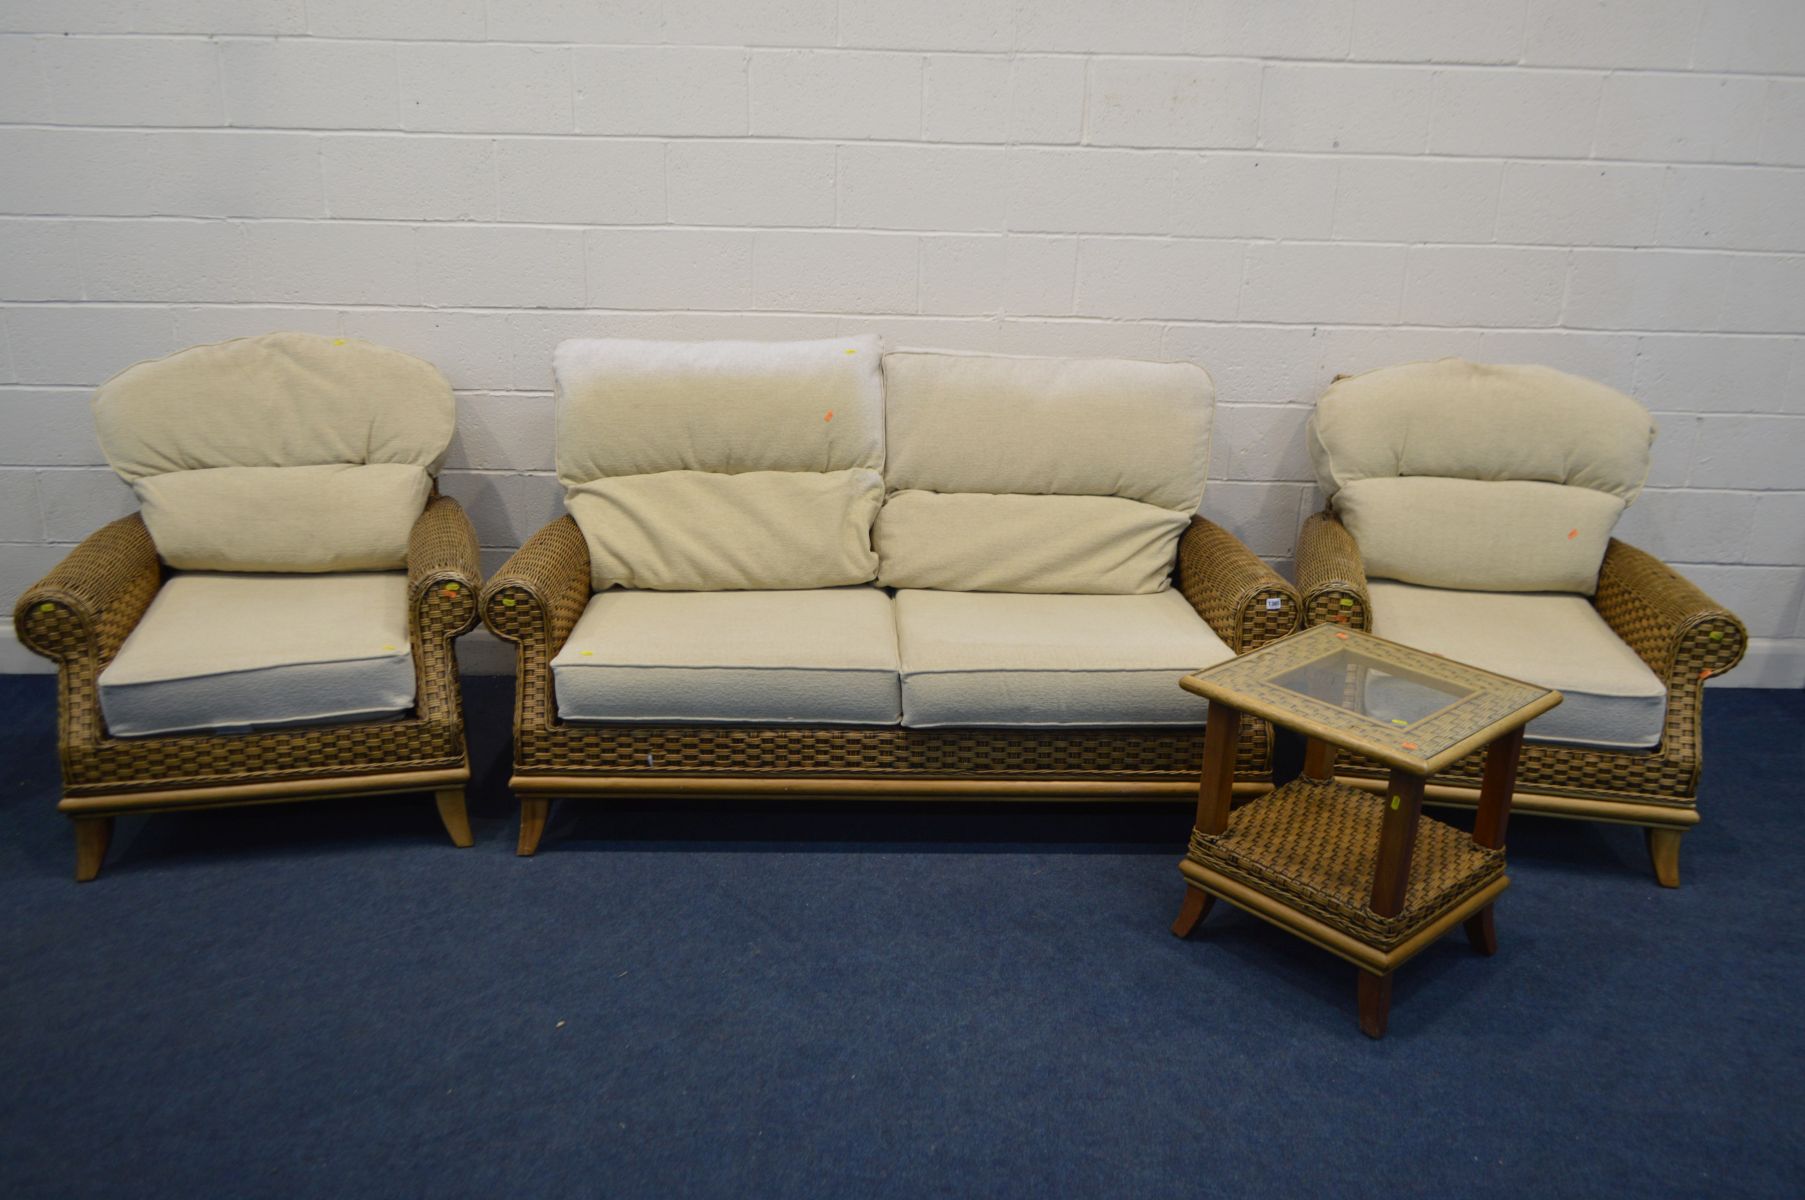 A FOUR PIECE CONSERVATORY SUITE, cream cushions, comprising a two seat settee, two armchairs and